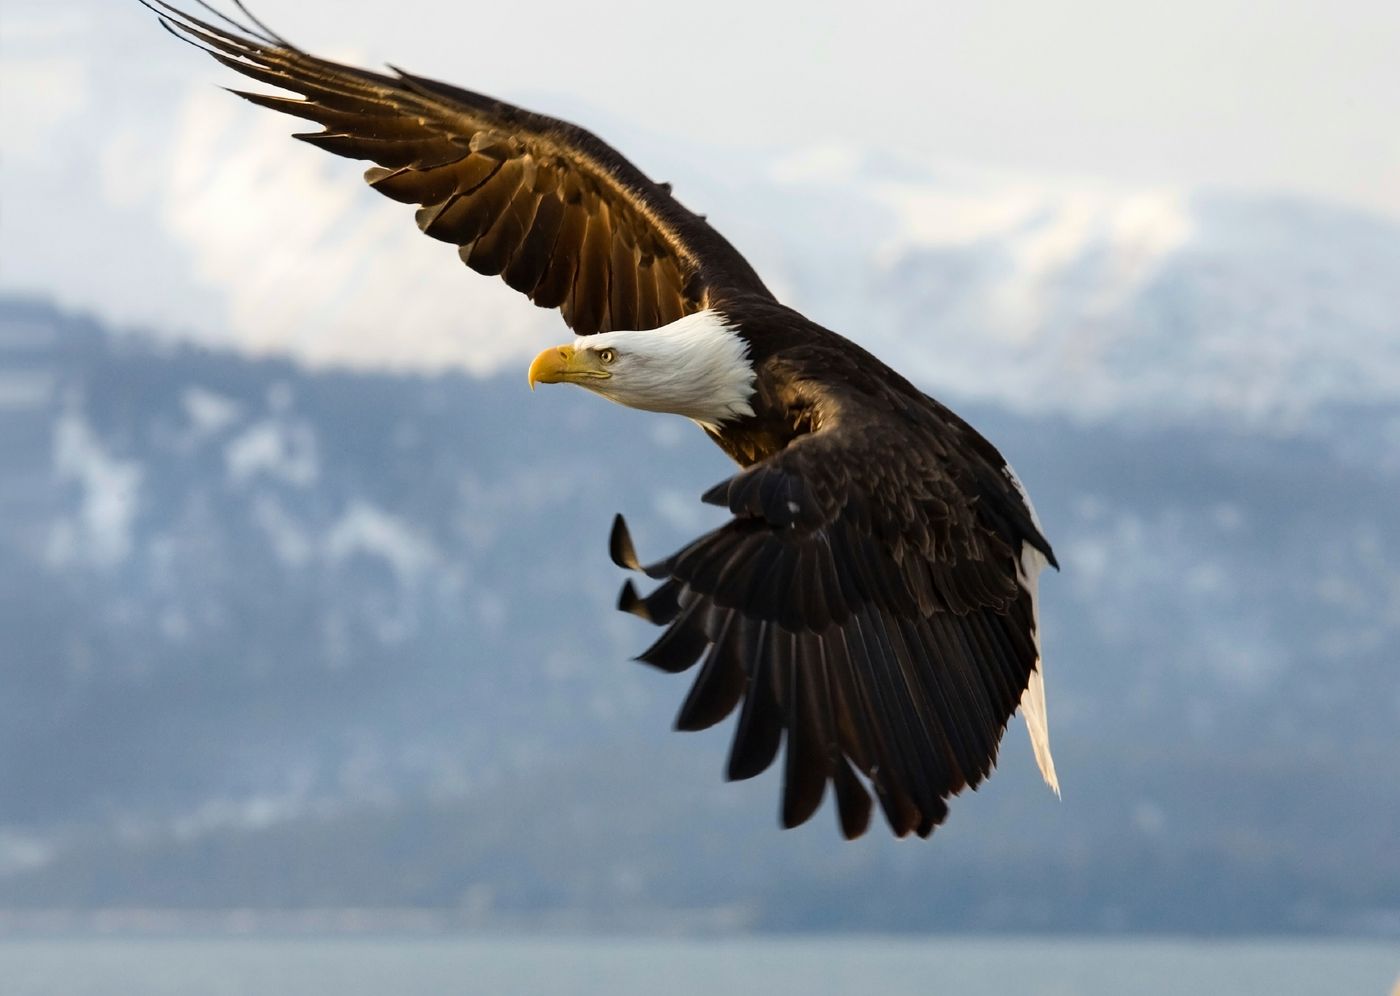 Bald eagles were brought back into healthy populations with support from the ESA